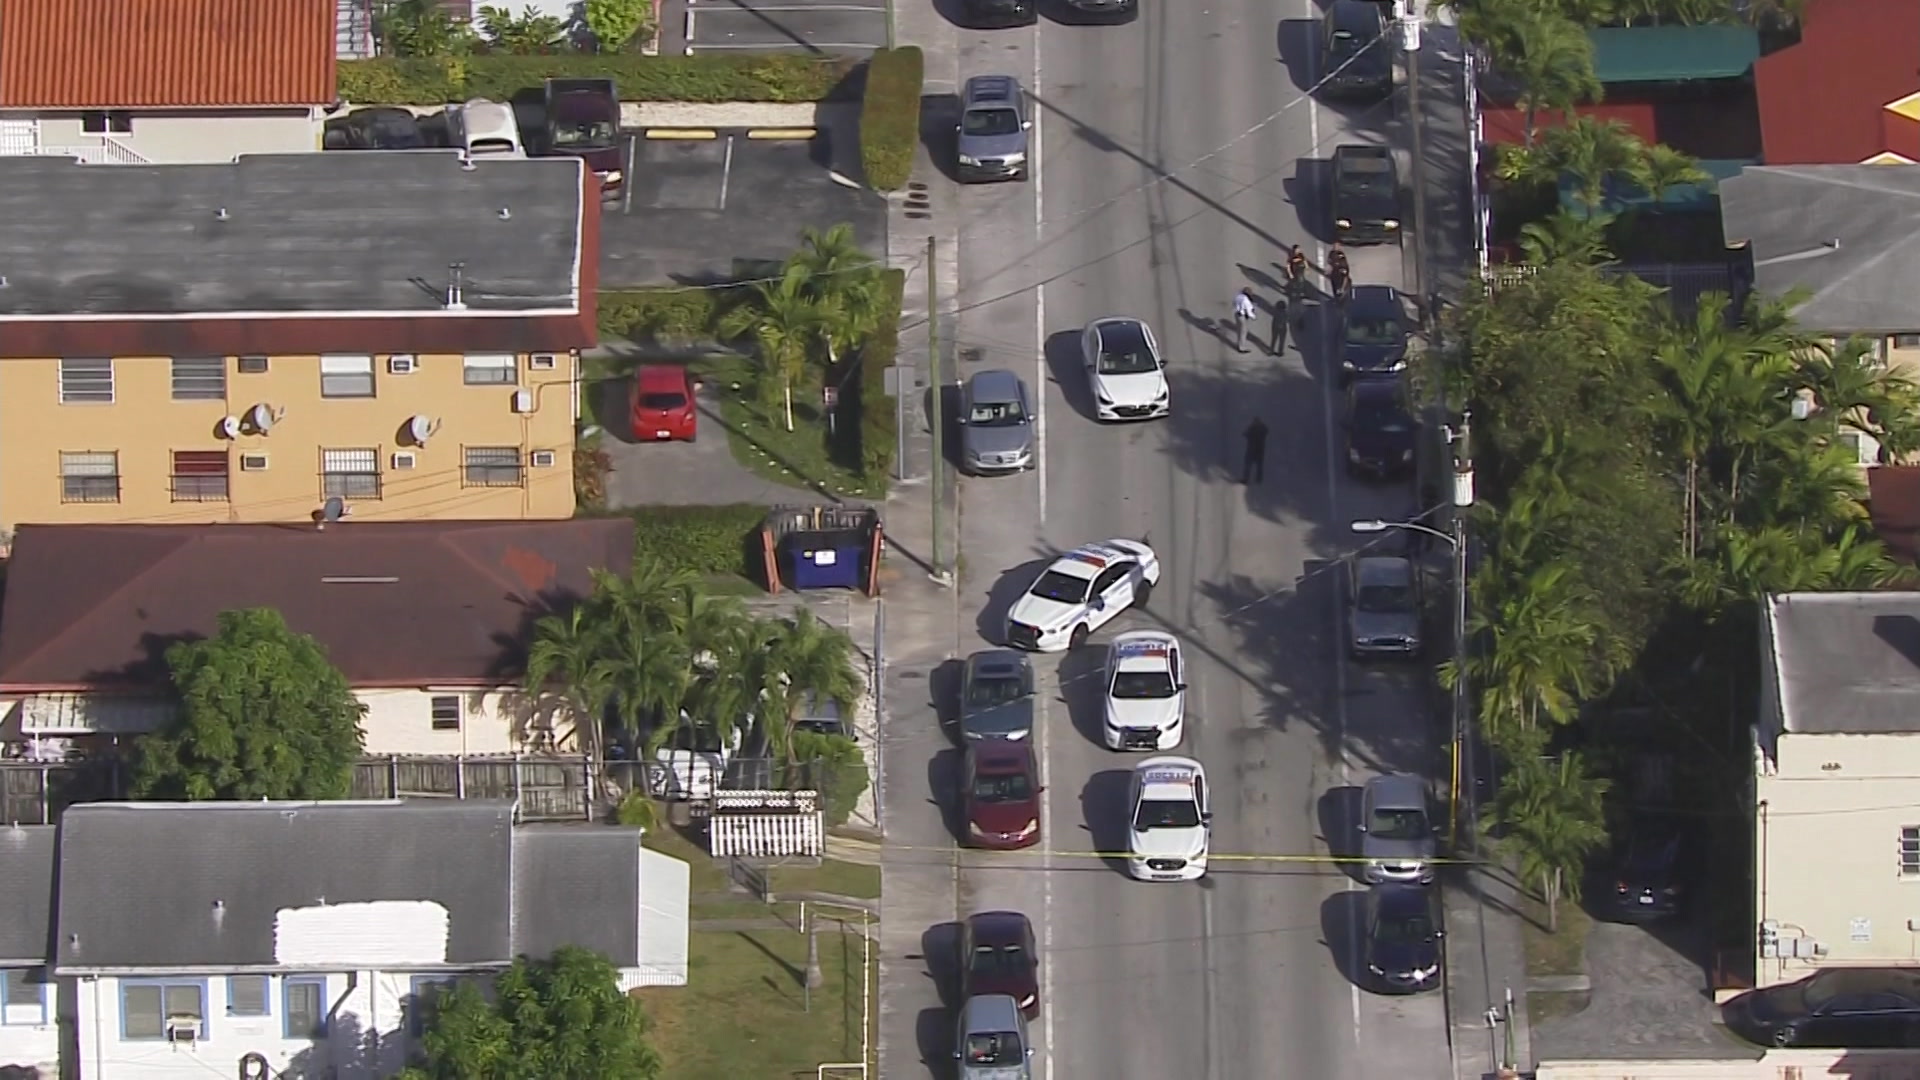 Police ID Victim, Man Who Called Police To Say He Shot Wife In Little Havana; Police-Involved Shooting Under Investigation